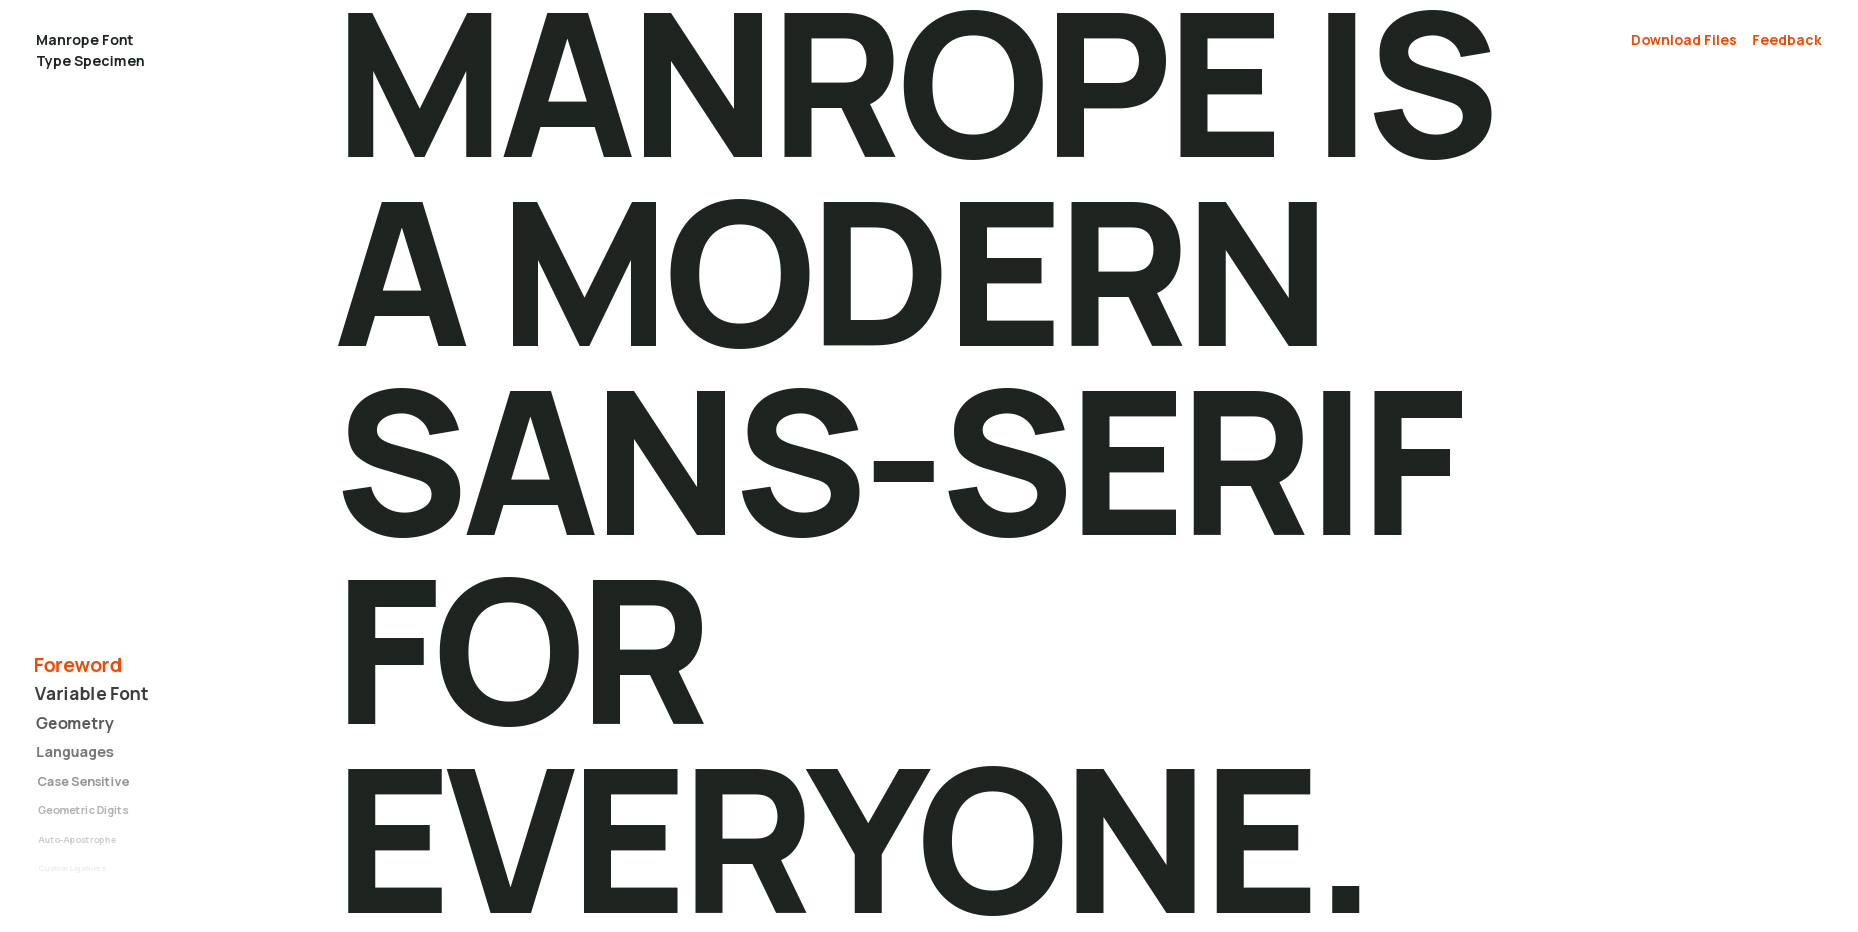 Manrope Font - Website of the Day